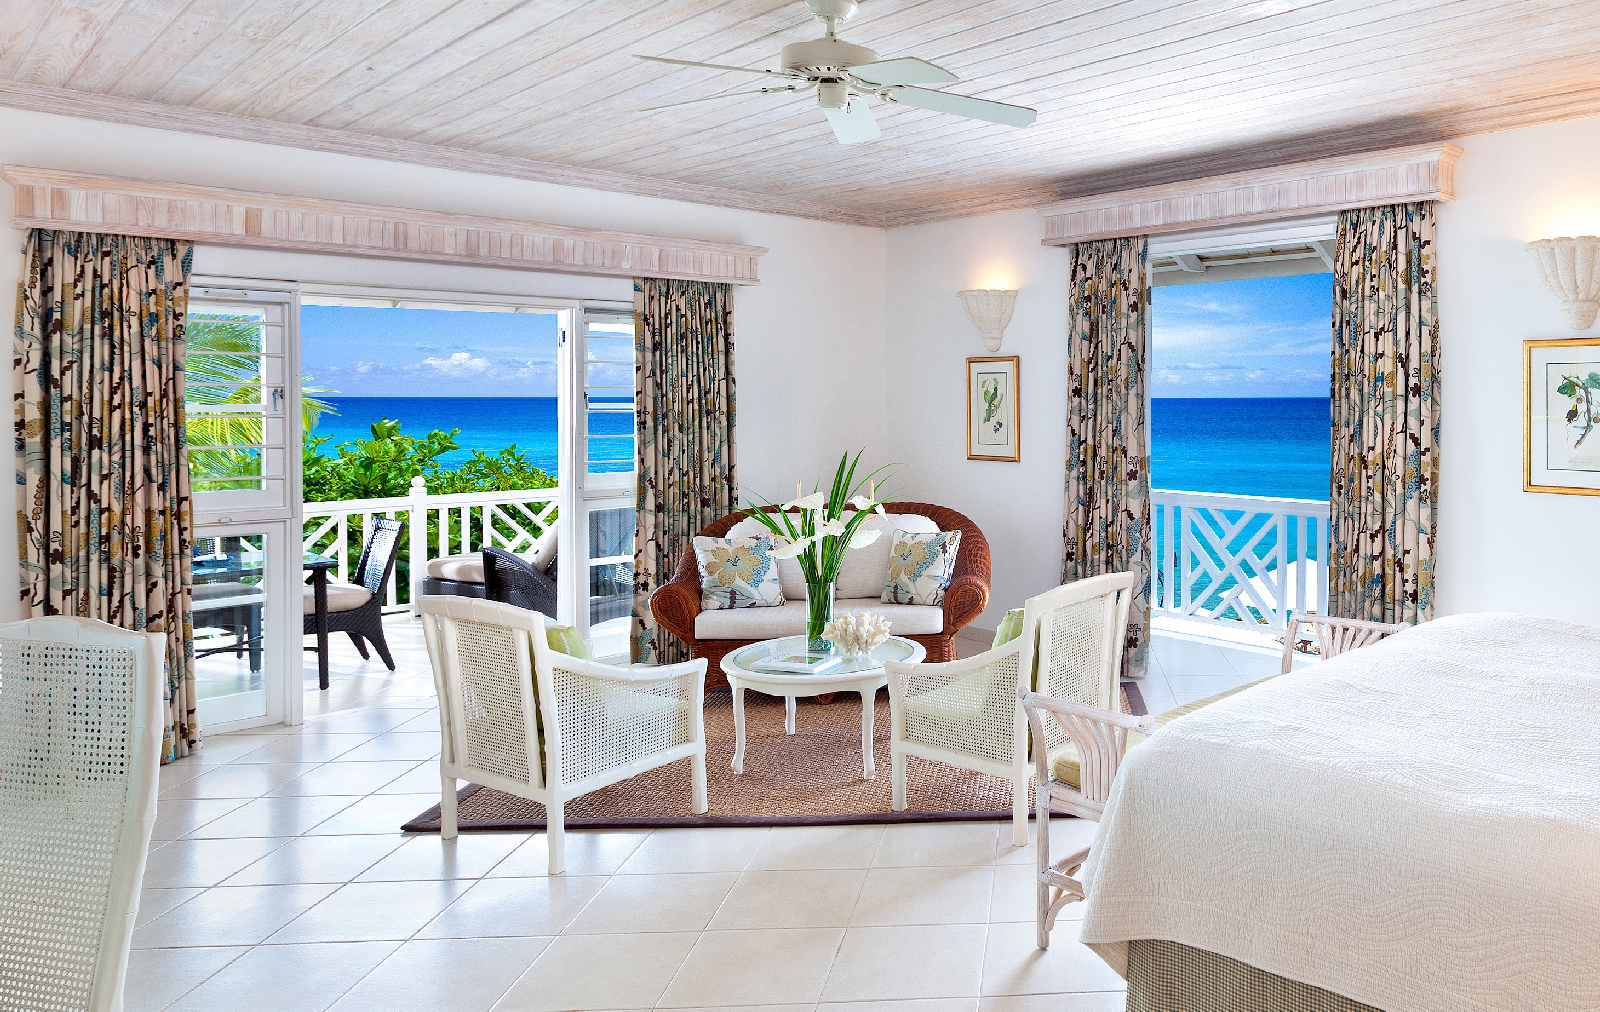 double bedroom with terrace access at coral reef club, barbados